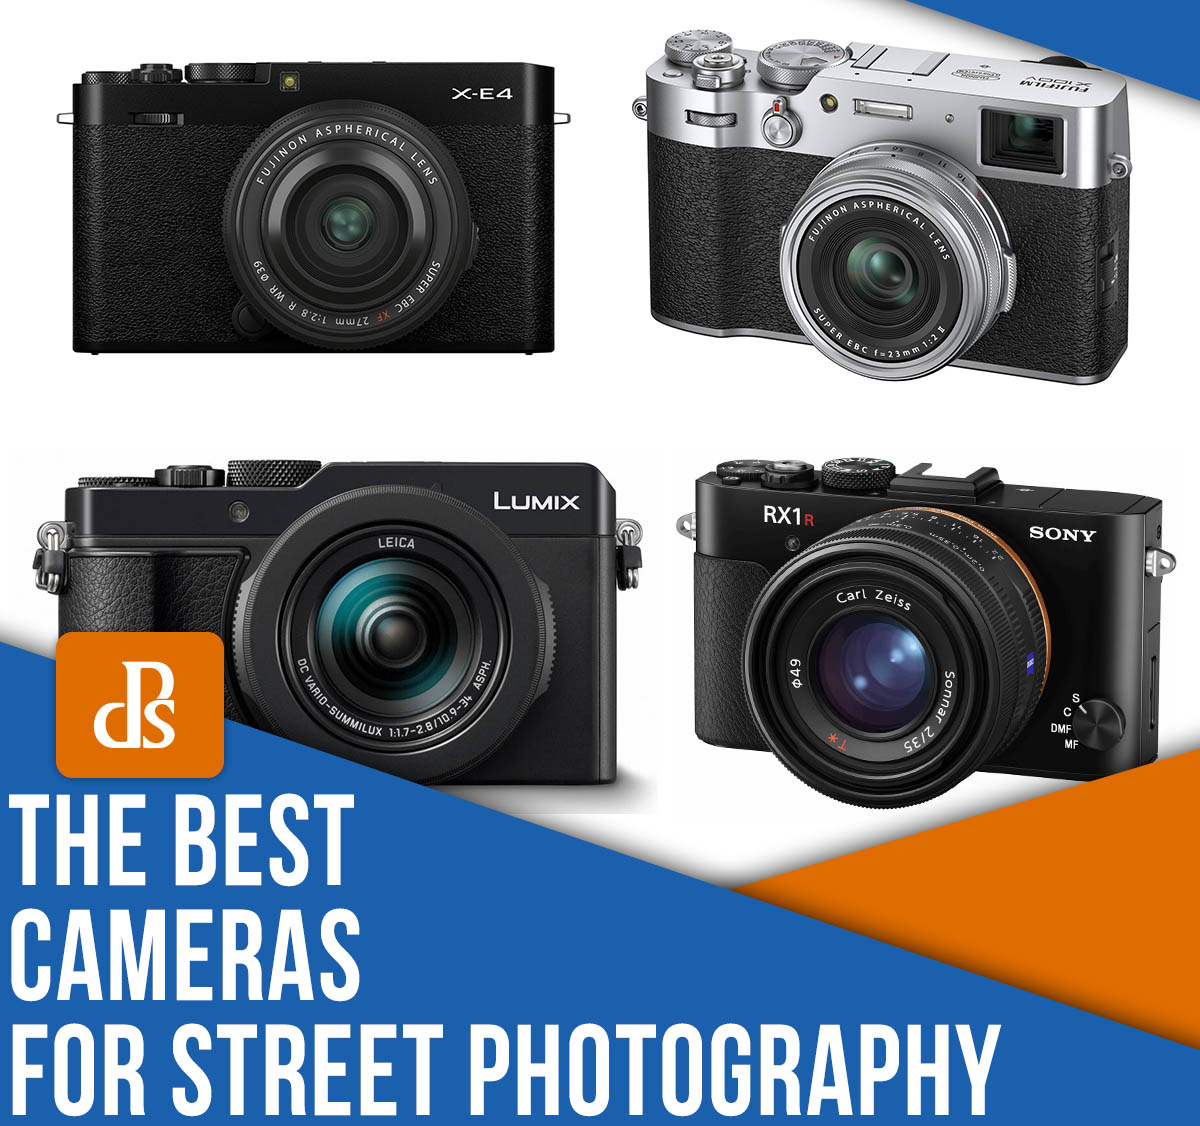 The best cameras for street photography